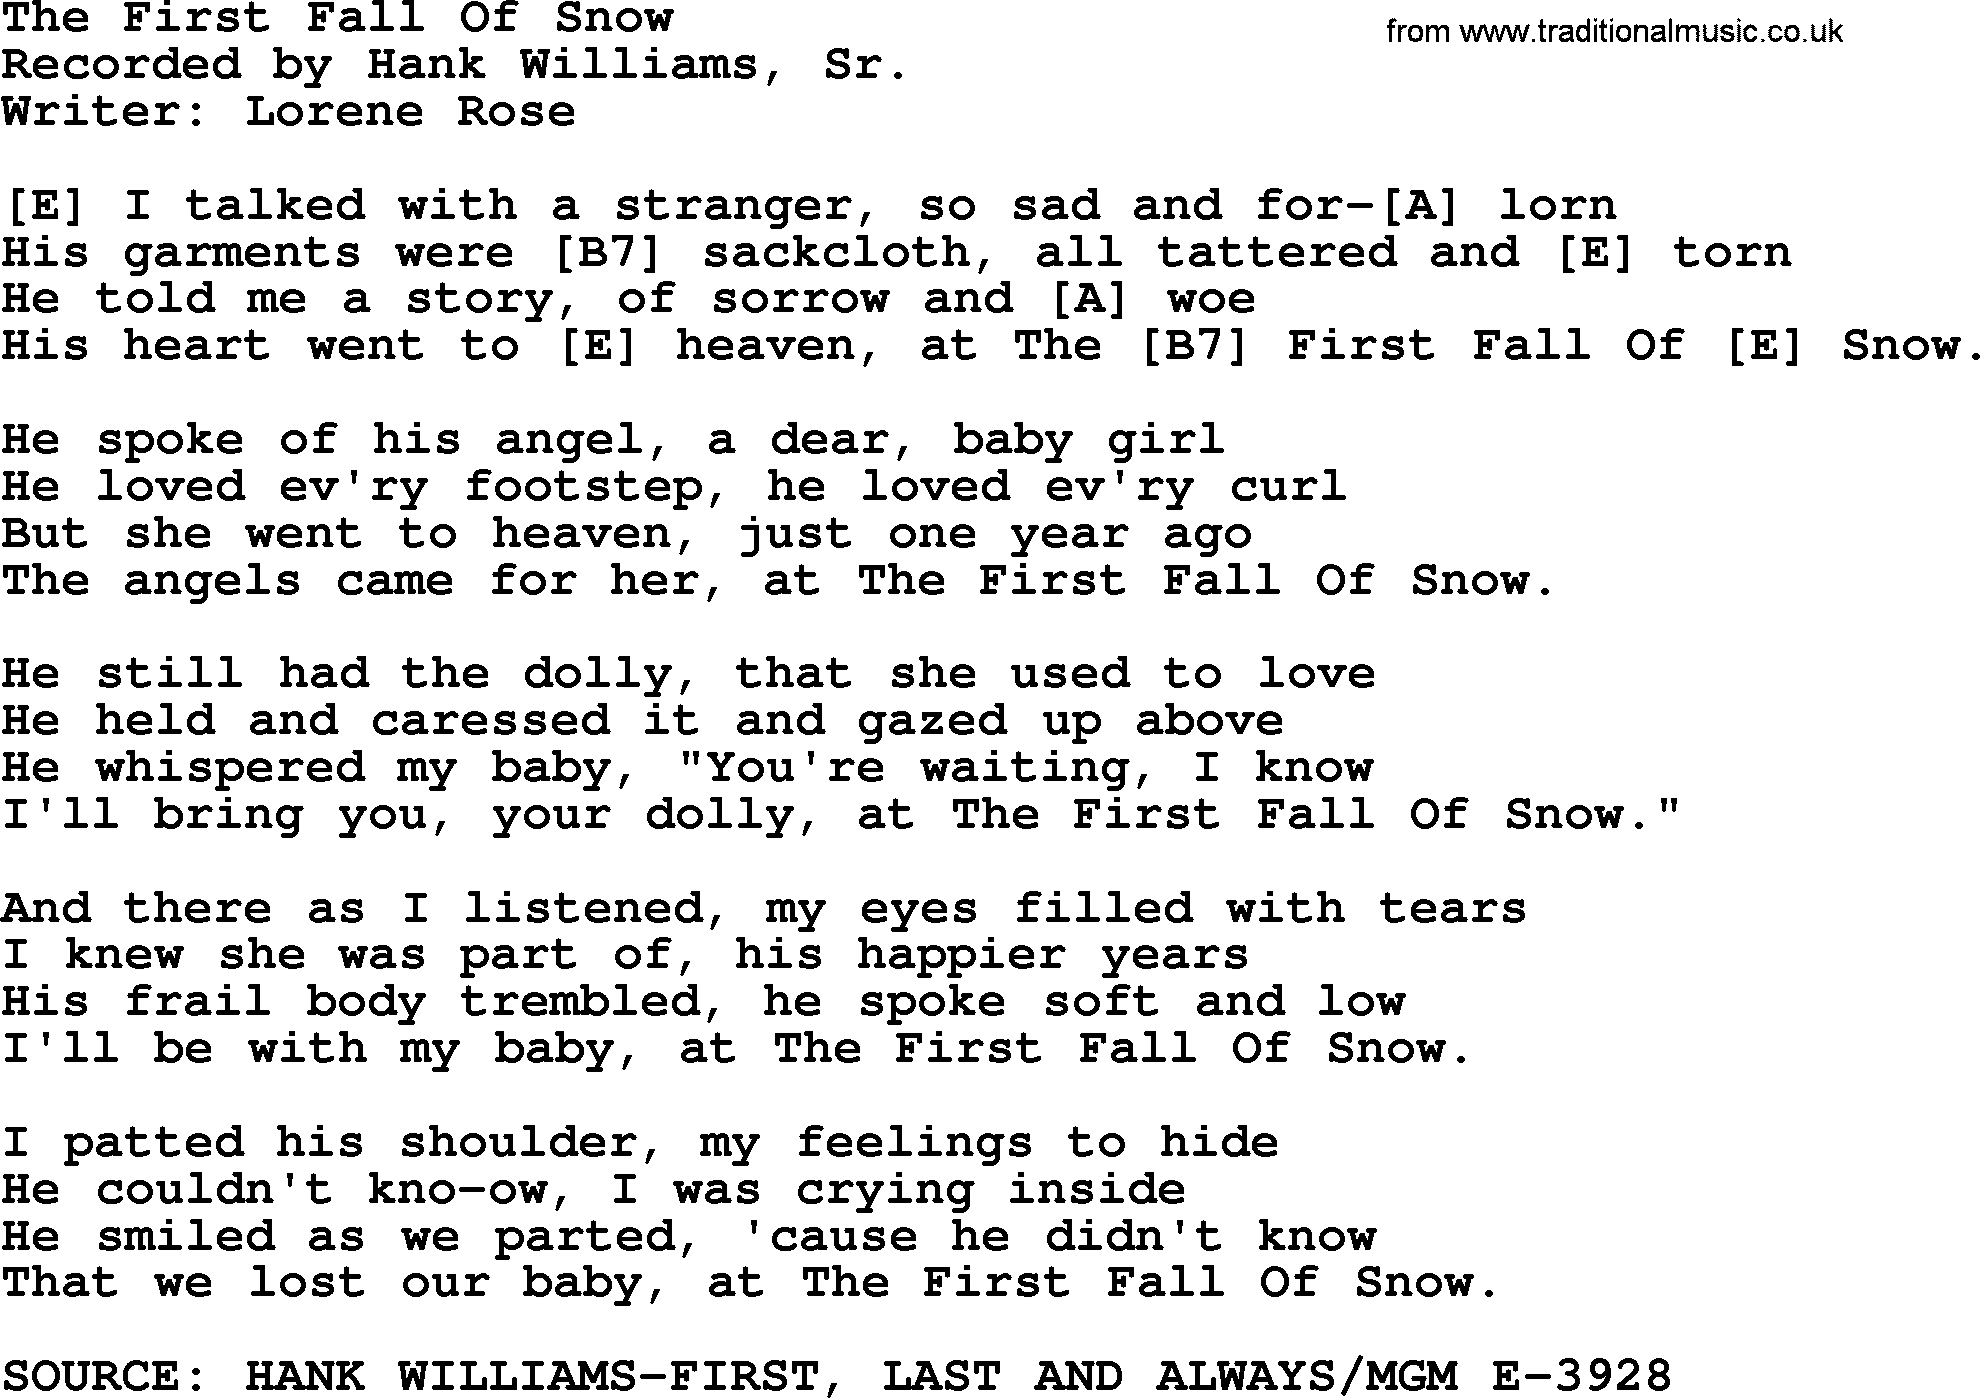 Hank Williams song The First Fall Of Snow, lyrics and chords